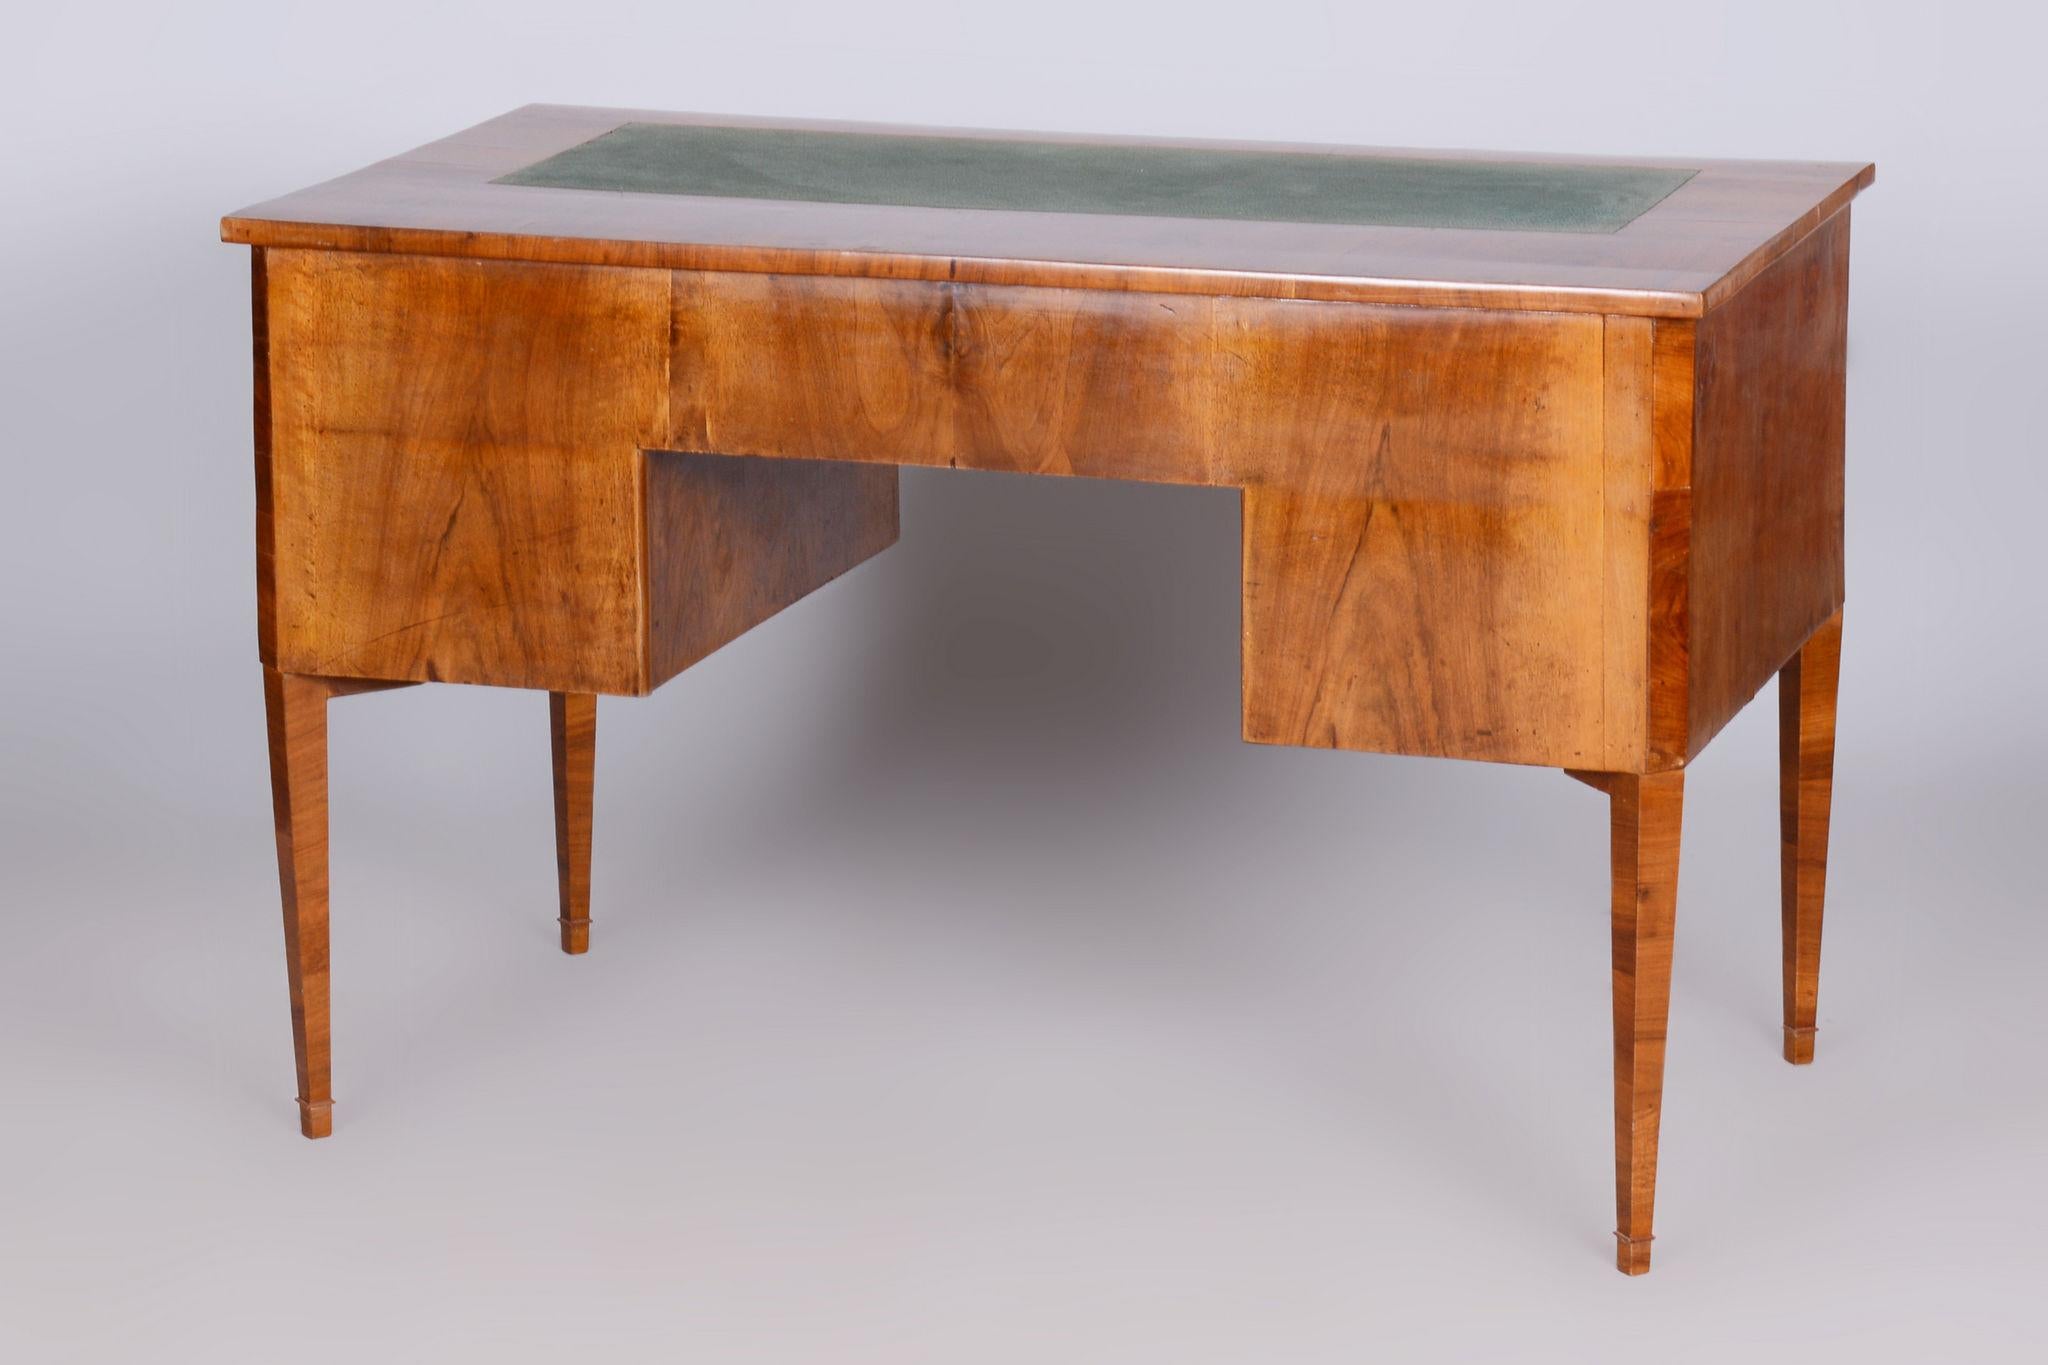 Restored Biedermeier Walnut Writing Desk.

Source: Czechia (Czechoslovakia)
Period: 1830-1839
Material: Walnut

Leg space:
Height: 62 cm (24.4 in)
Width: 51 cm (20.1 in)

Revived polish. The top plate is fitted with a green writing insert.

Our